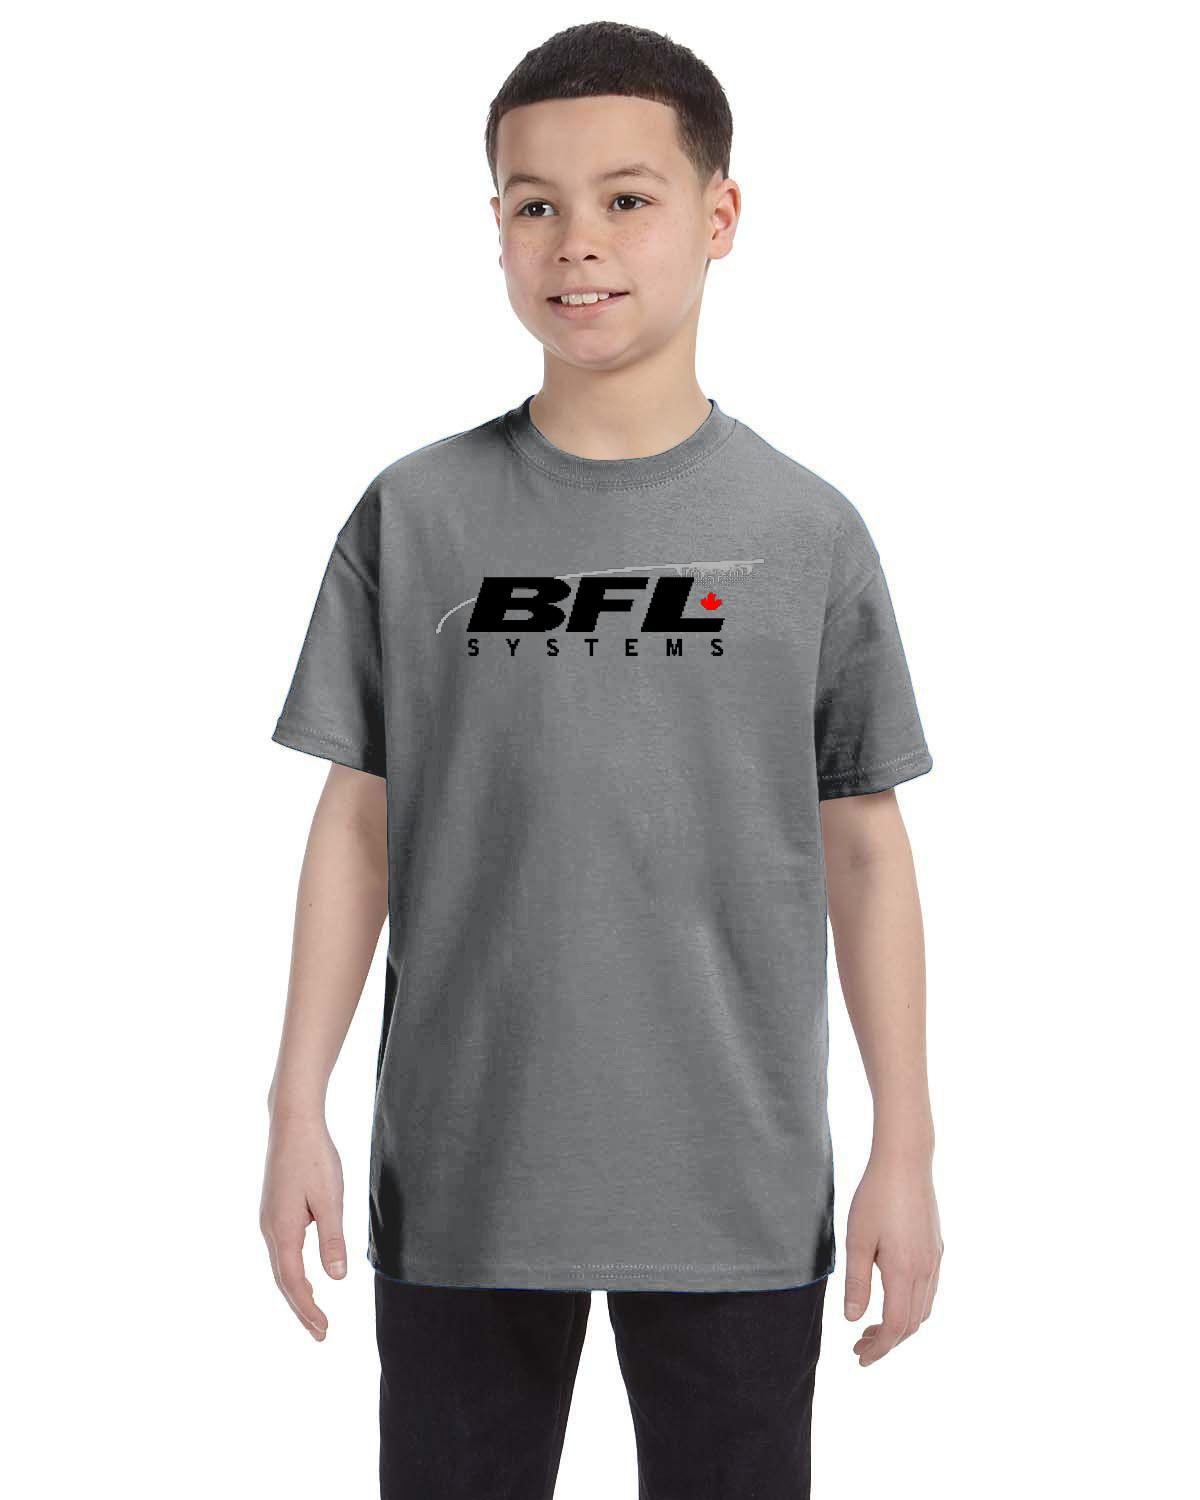 BFL Systems Kid's T-Shirt